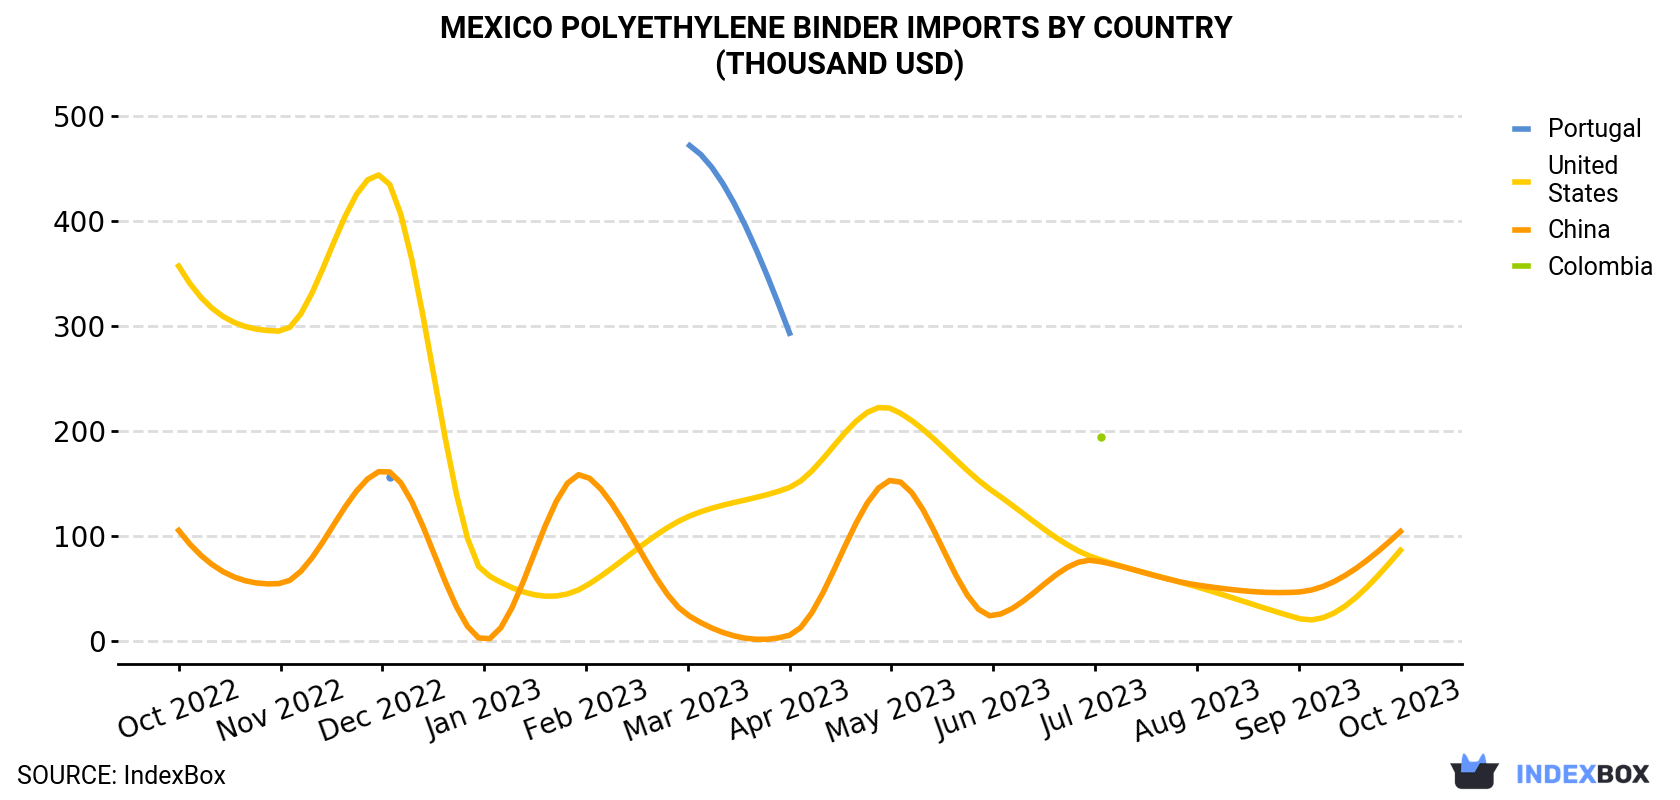 Mexico Polyethylene Binder Imports By Country (Thousand USD)